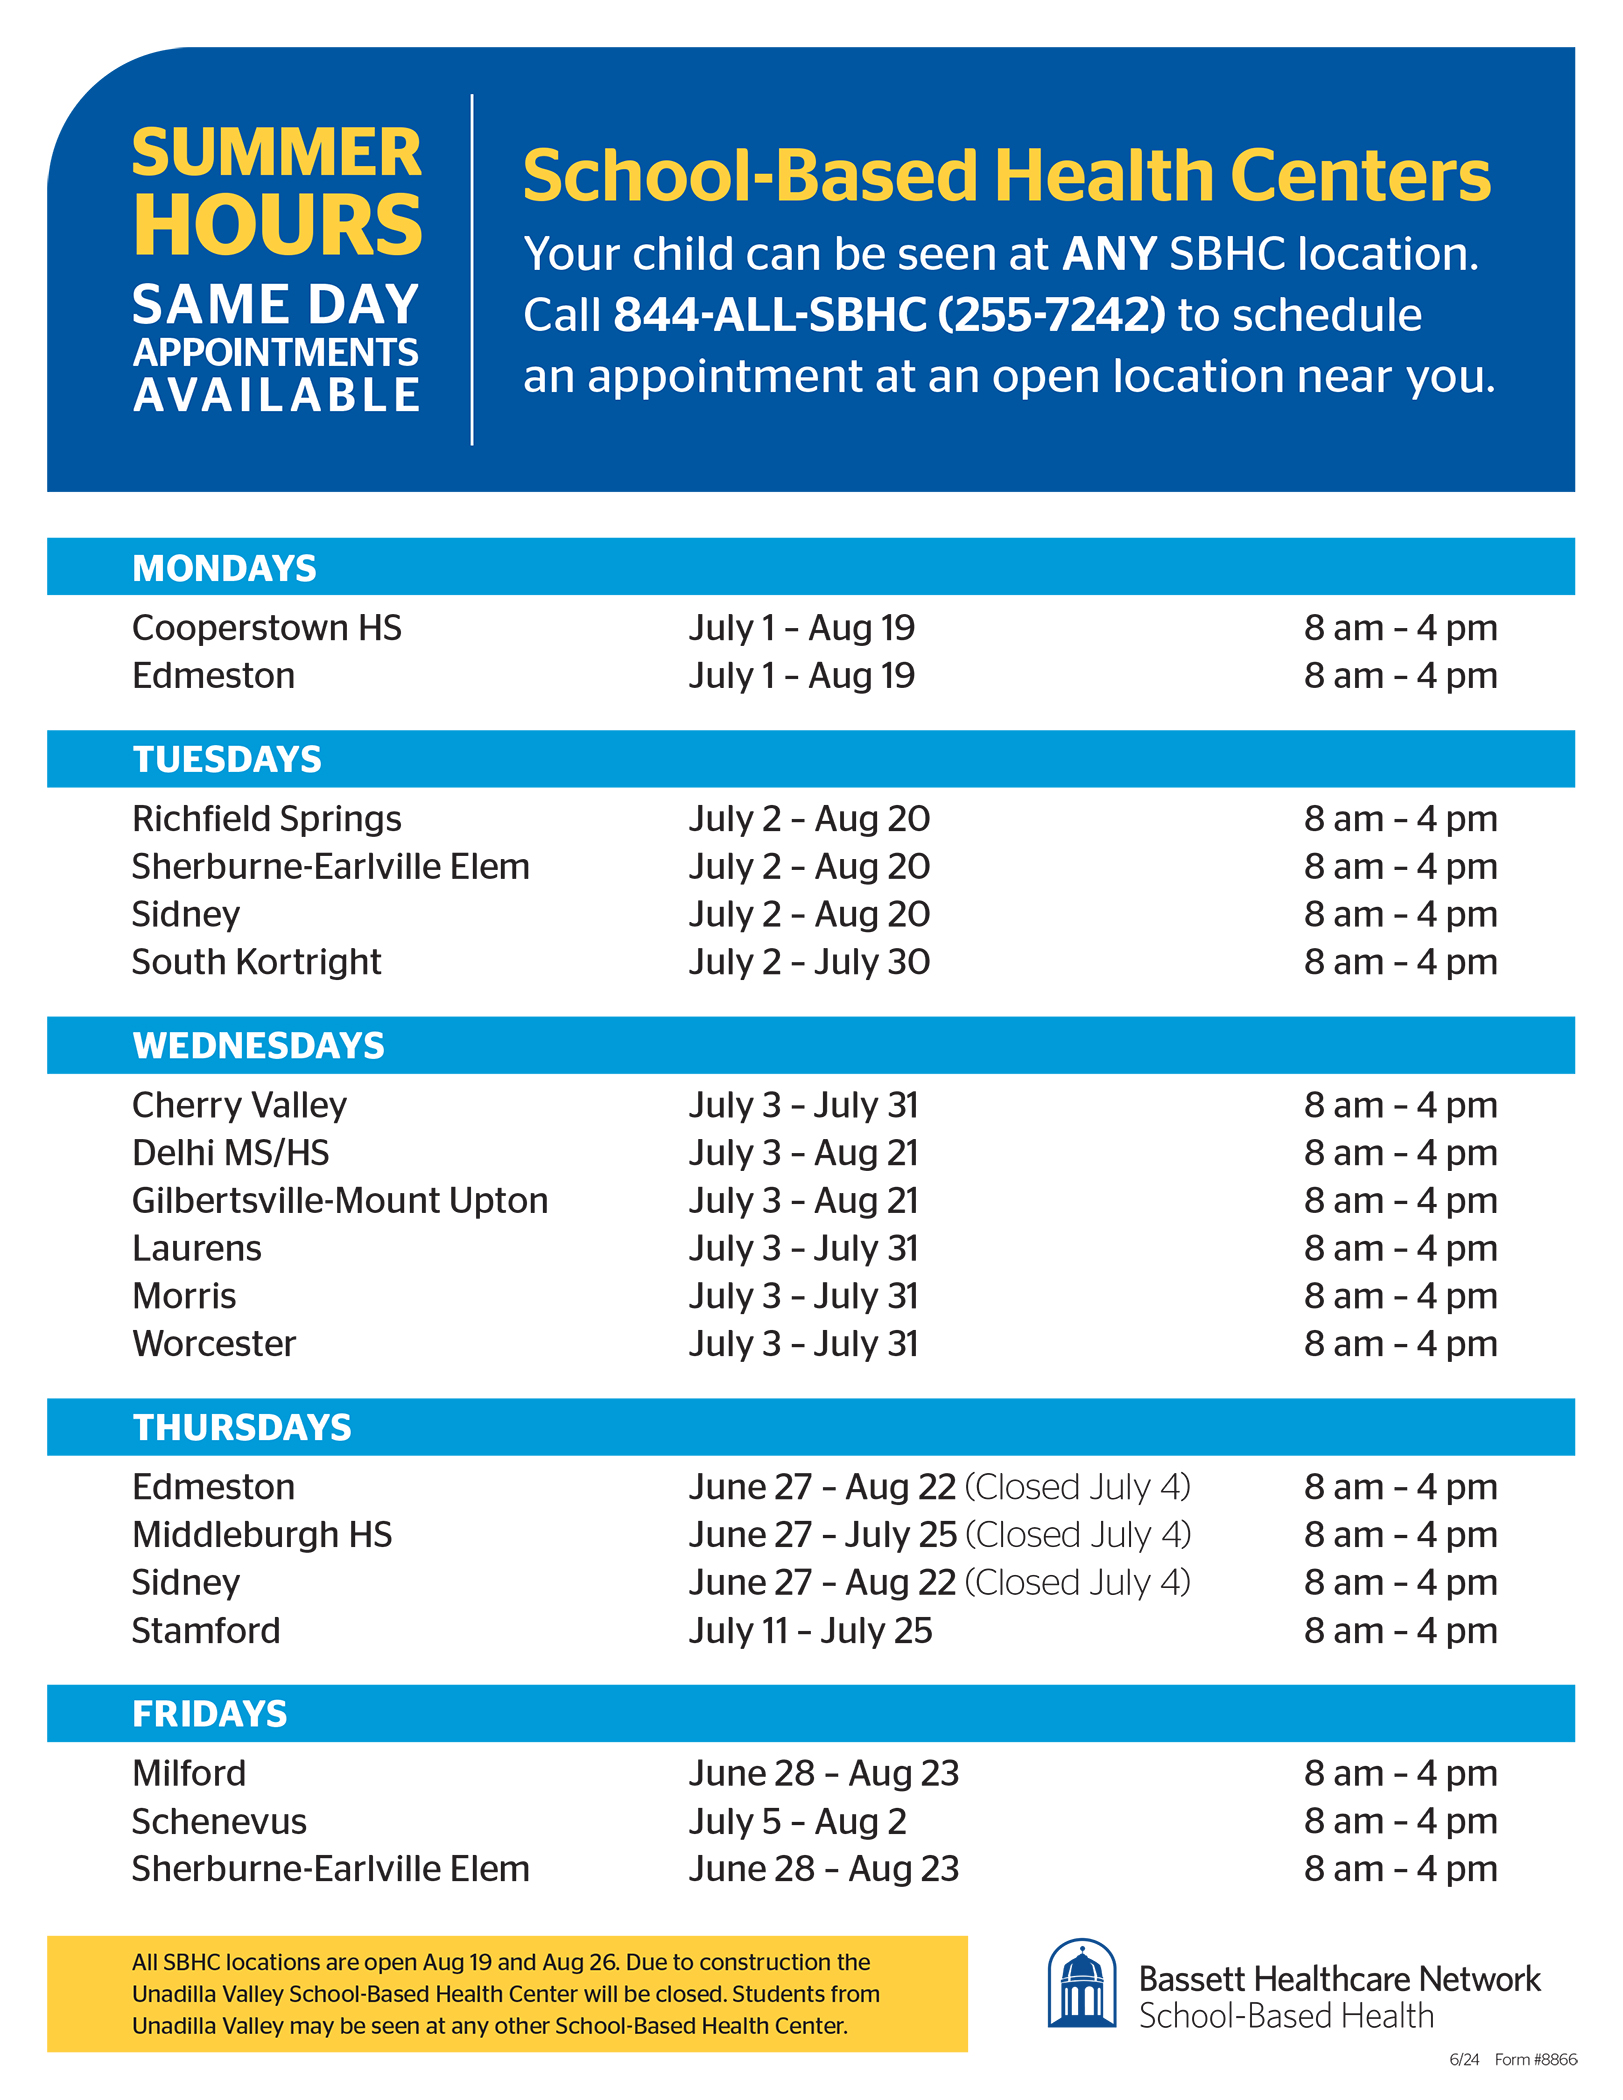 School-Based Health Centers Your child can be seen at ANY SBHC location. Call 844-ALL-SBHC (255-7242) to schedule an appointment at an open location near you.